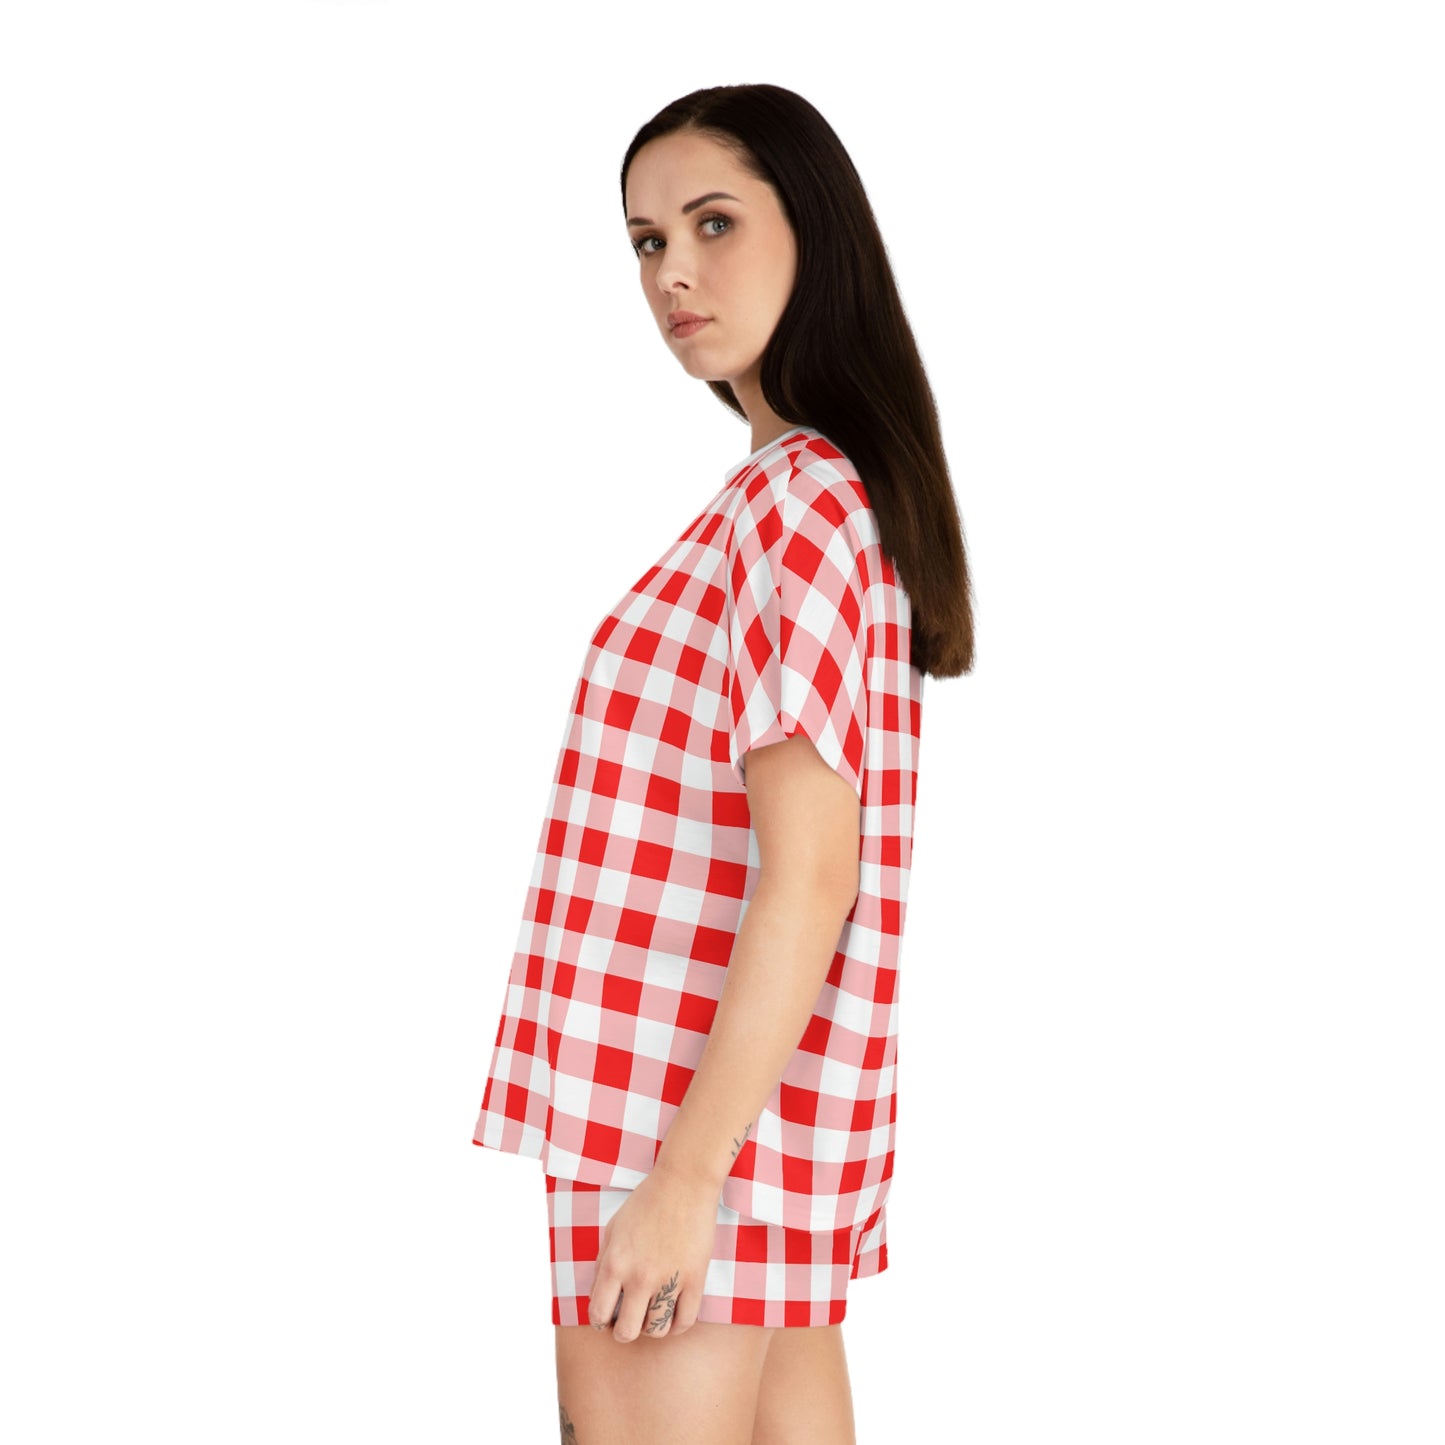 TGIF Sleepover PJs in Ruby Red Gingham Tee & Pajama Shorts-Set | Pinup Couture Relaxed